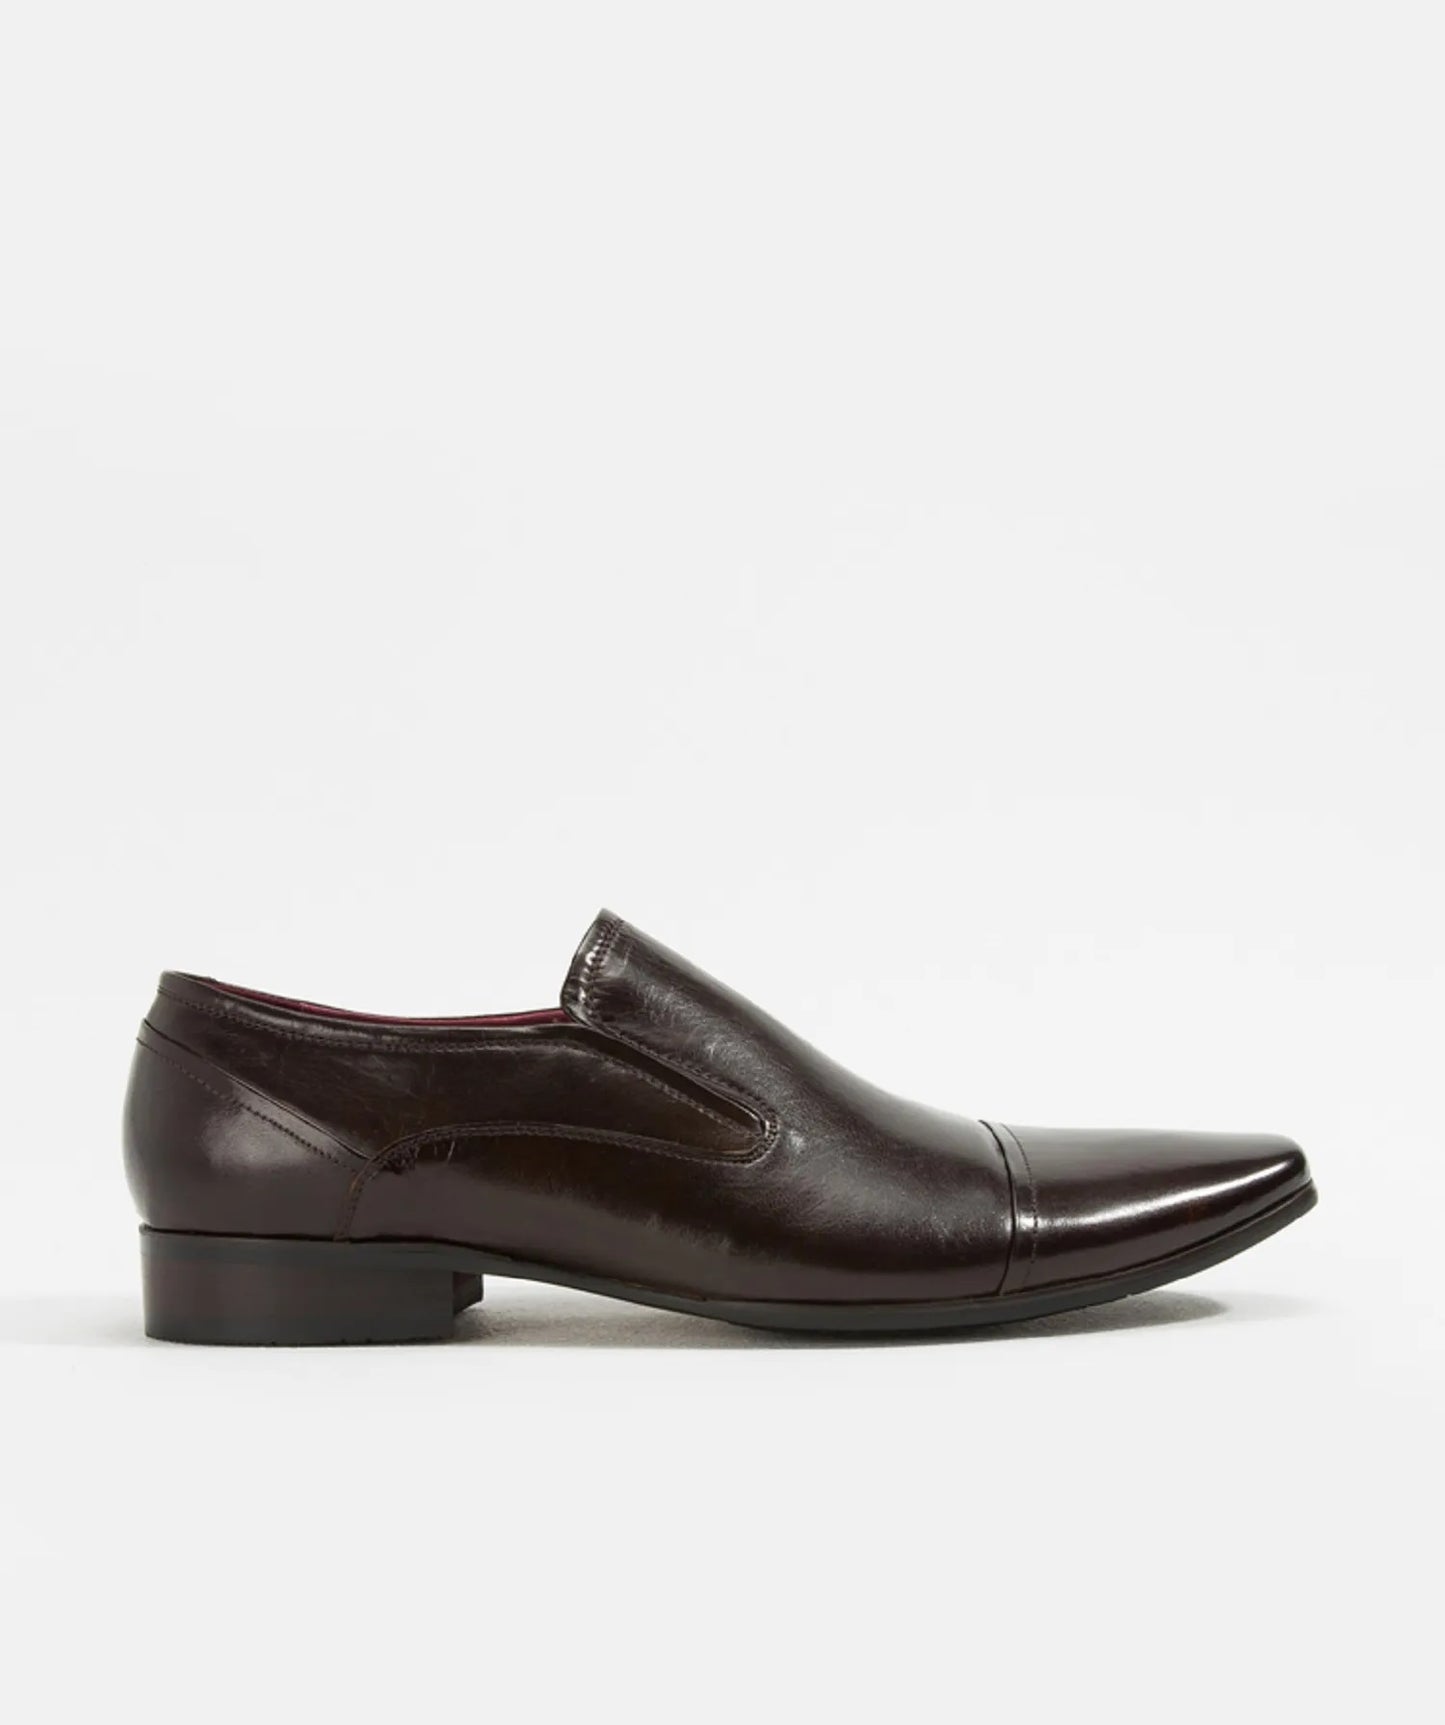 Austin Leather Loafer Business Shoes in Dark Brown